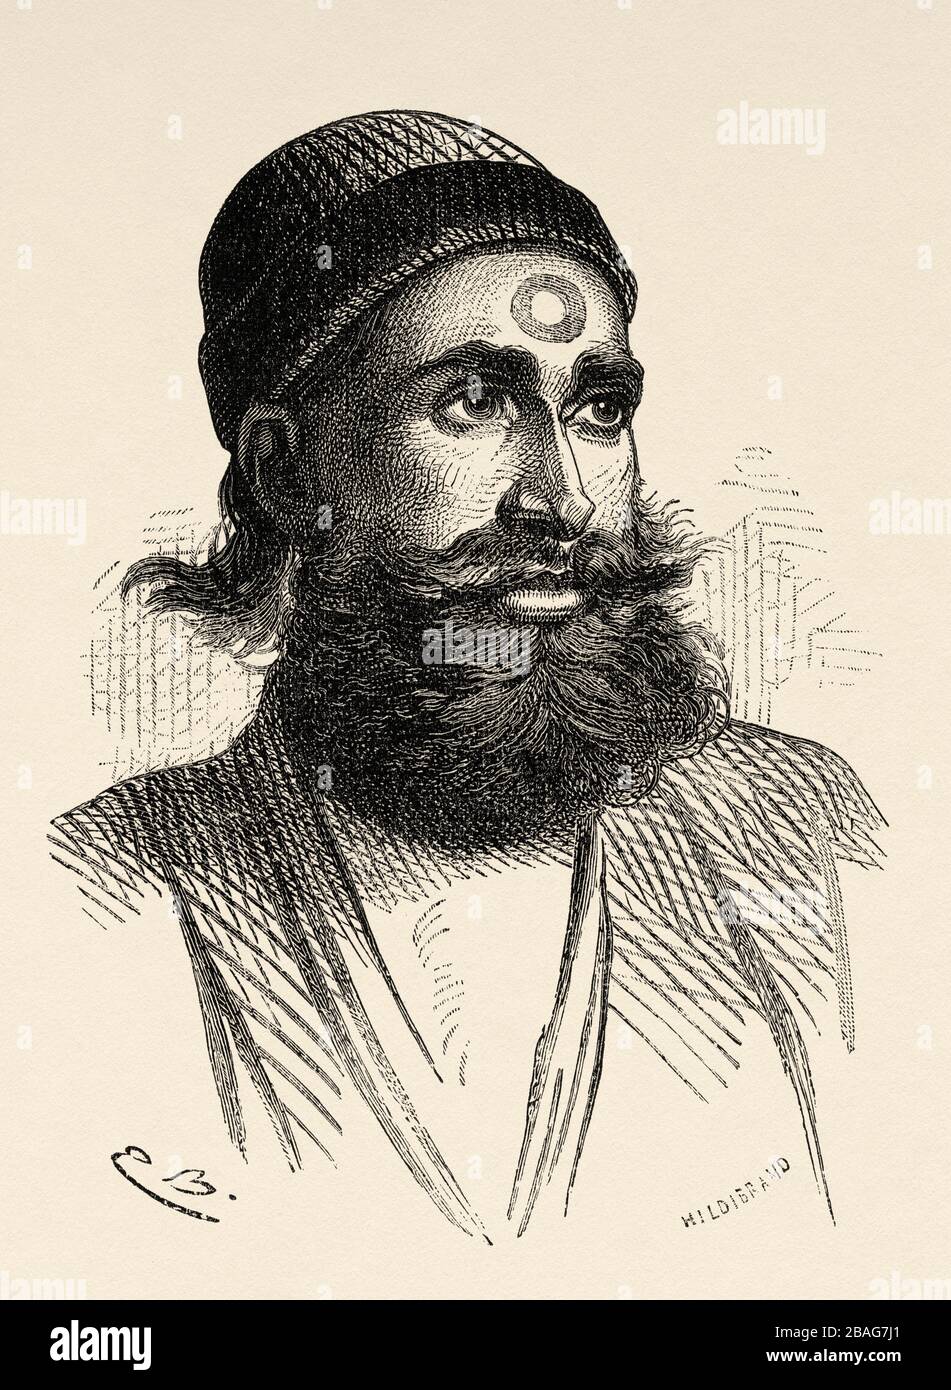 Portrait of an Indian man, from Travels in central Asia 1863 by Armin Vambery. Old engraving El Mundo en la Mano 1878 Stock Photo